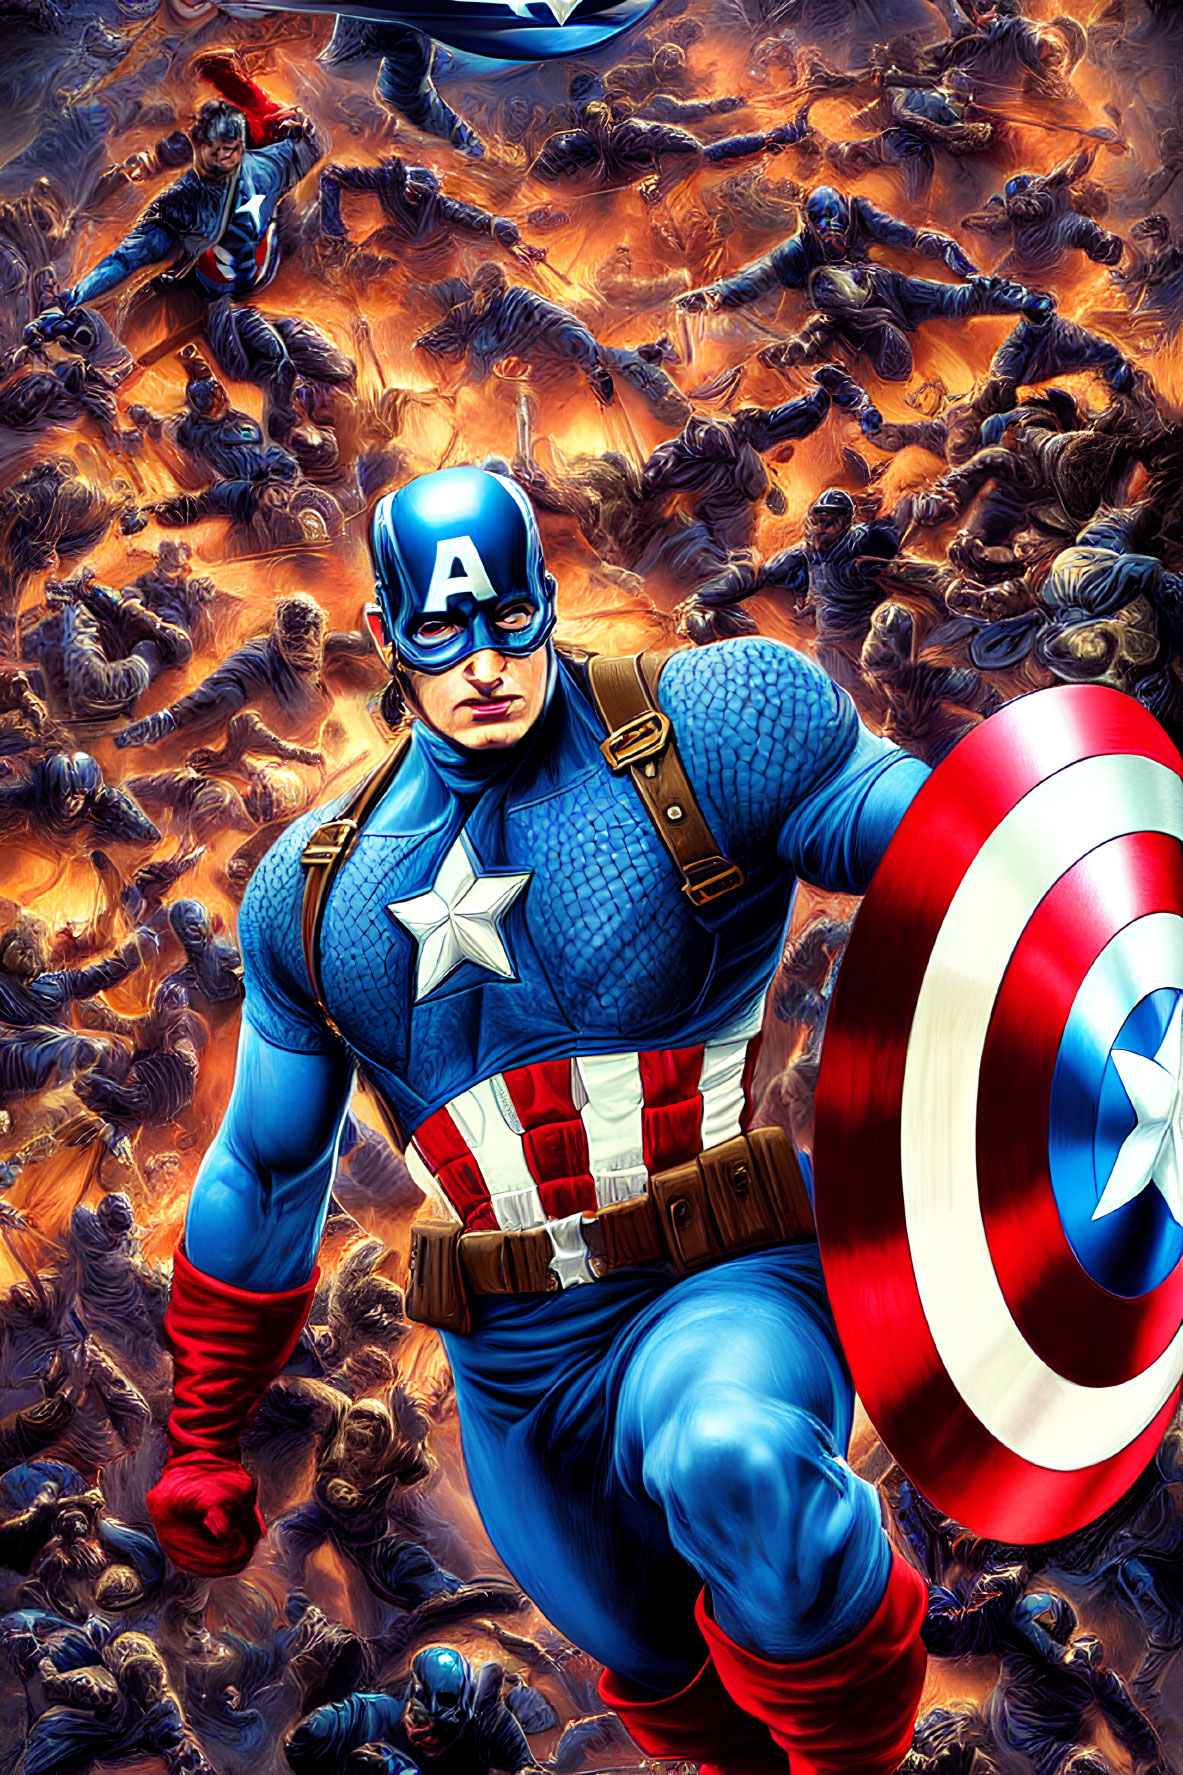 Captain America in chaotic battle with shield amid explosions